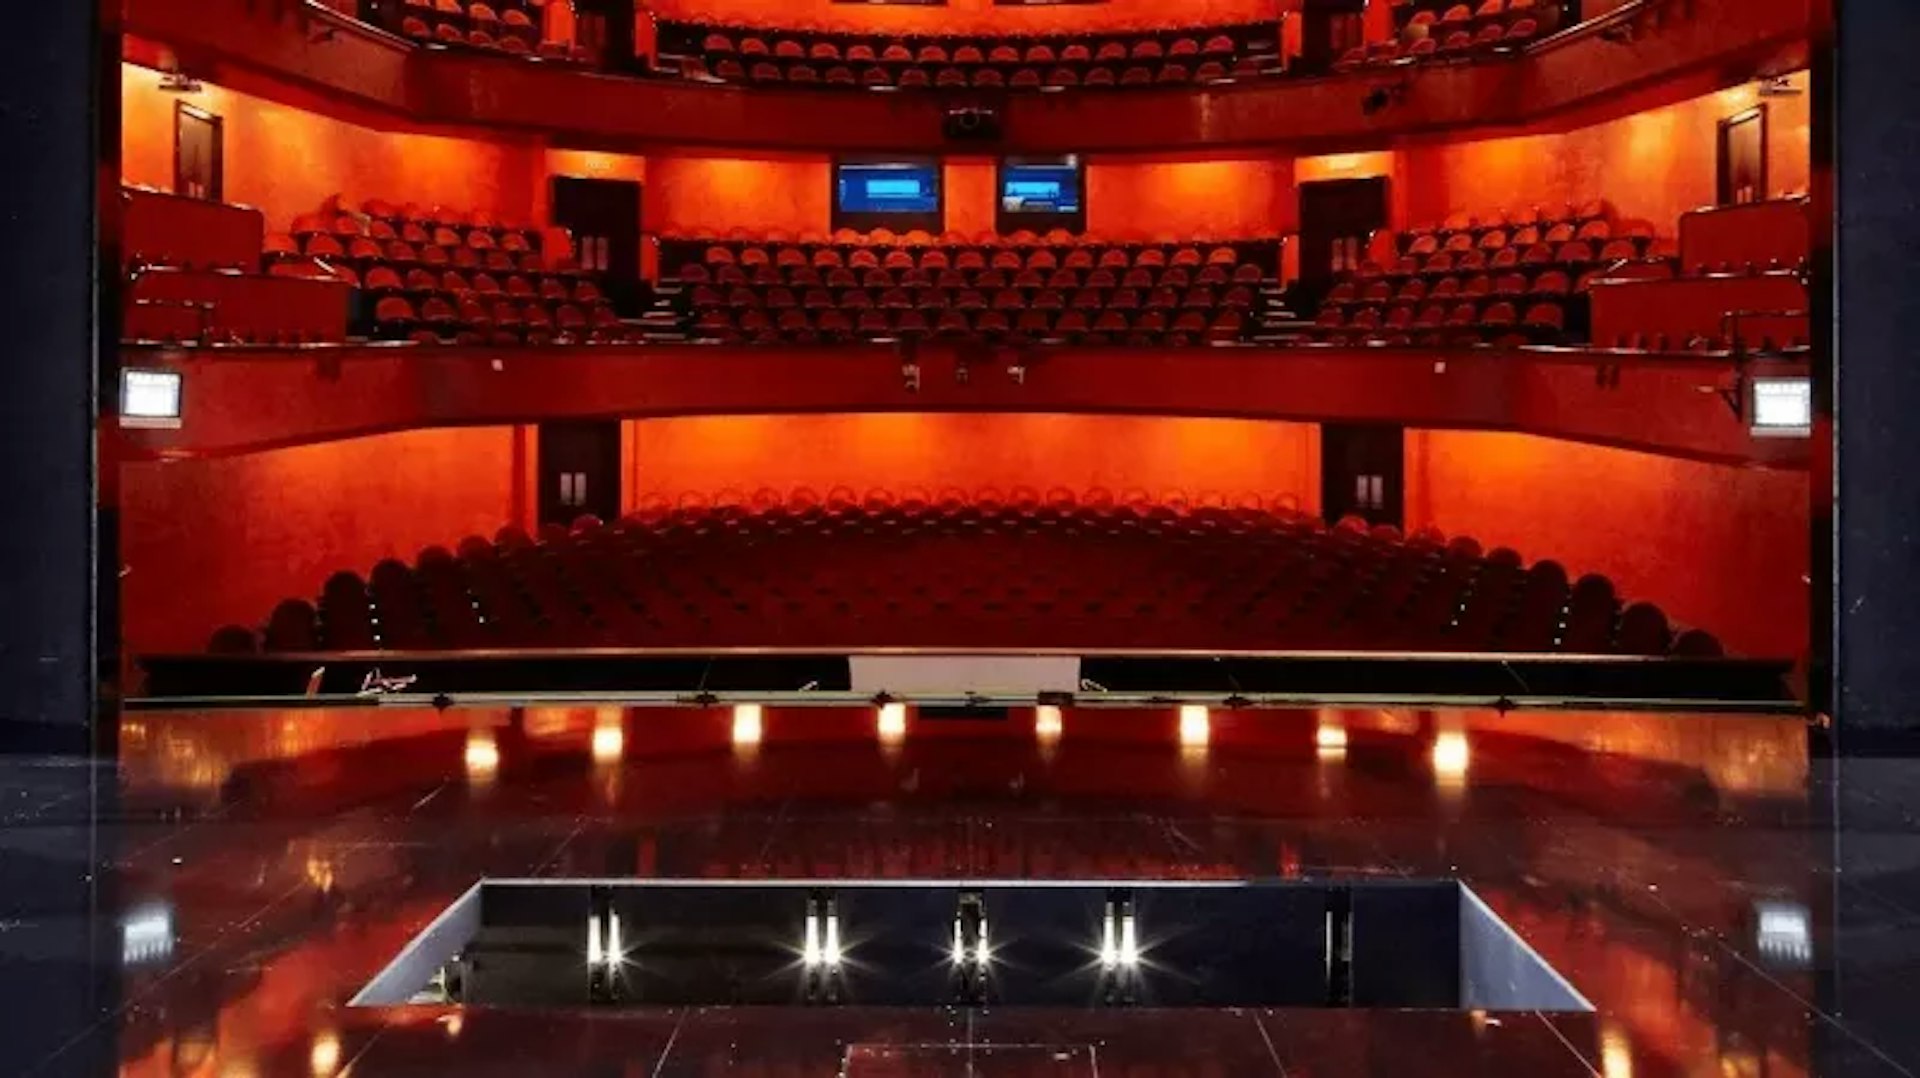 View from the stage of a theater with red seats